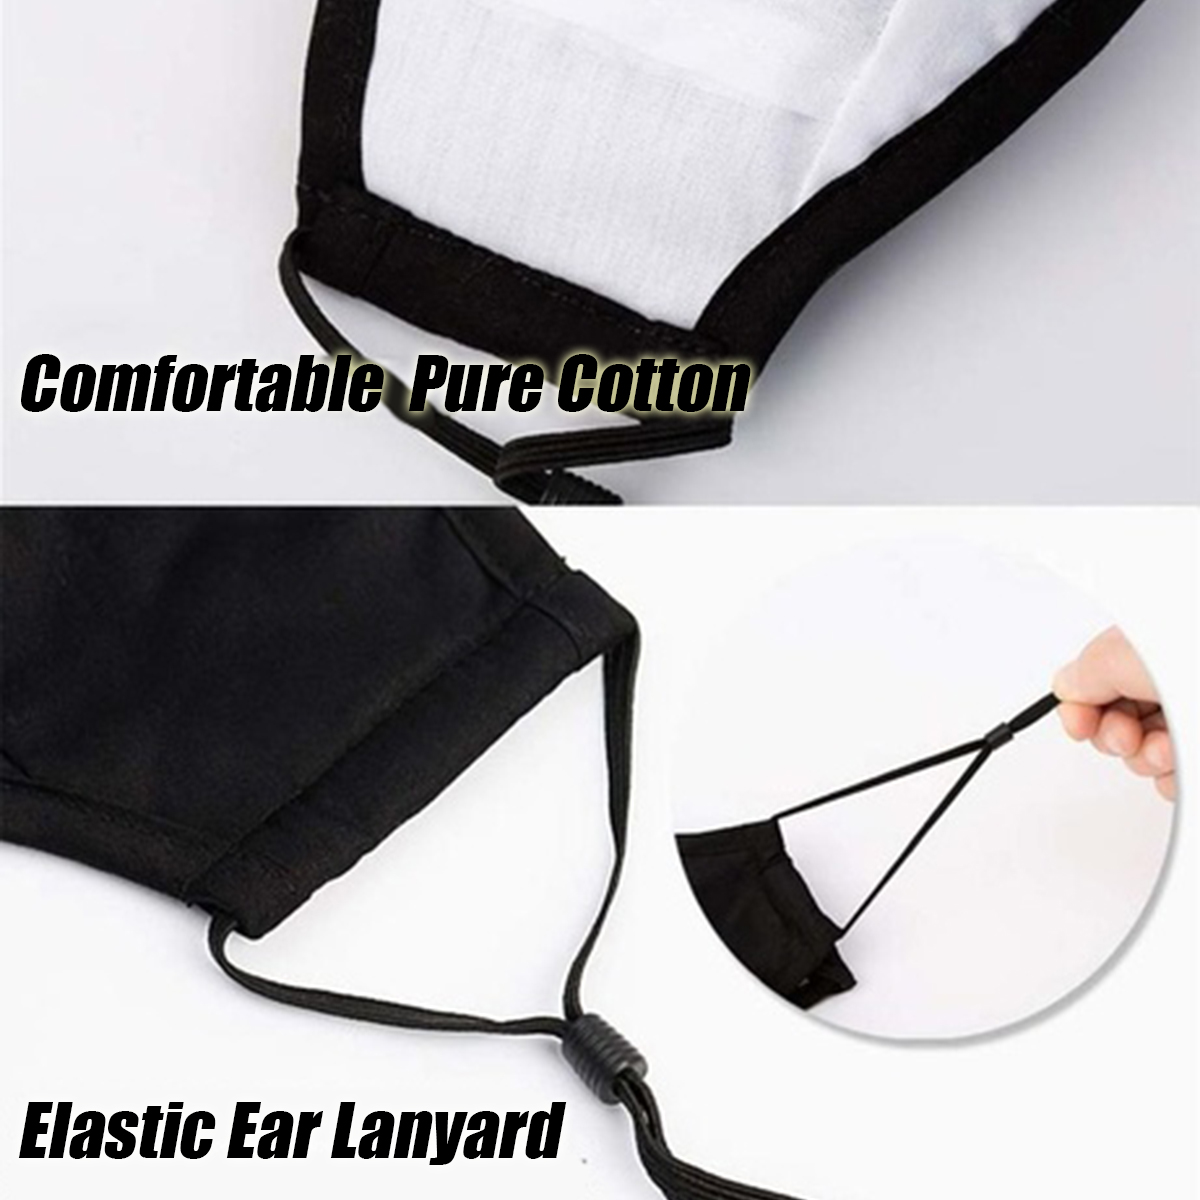 Cotton-Anti-Dust-Face-Mask-Cover-Reusable-PM25-Respirator-with-Filters-Ear-Loop-1662325-4